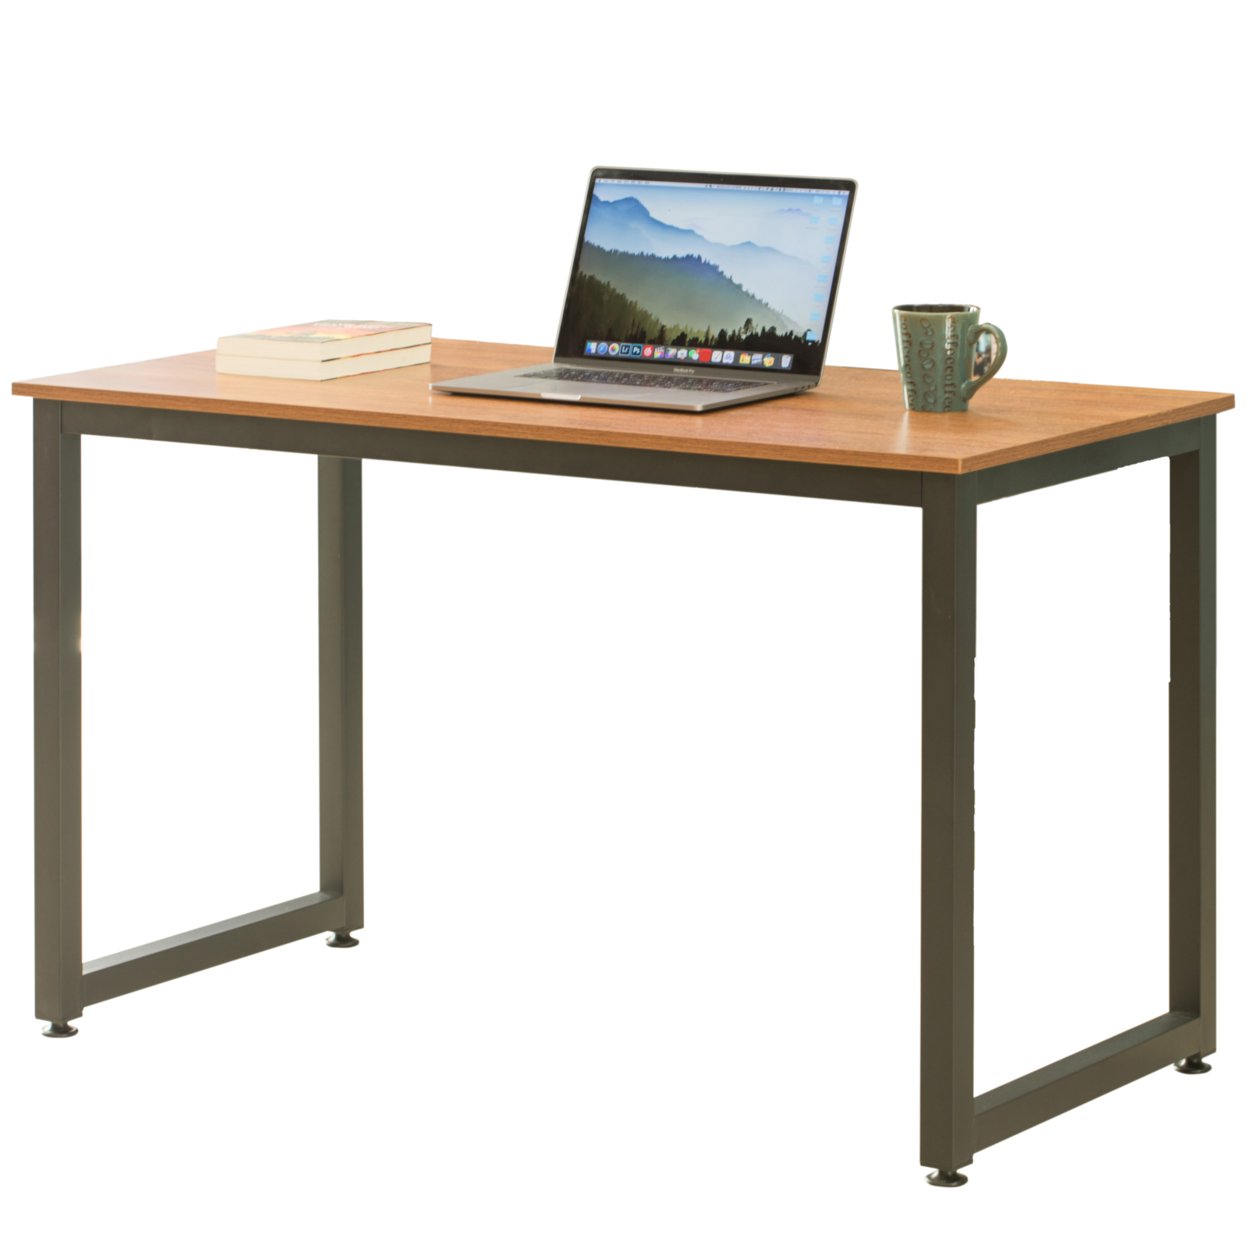 Wooden Writing Desk Homes Office Table With Sturdy Metal Frame - Cherry